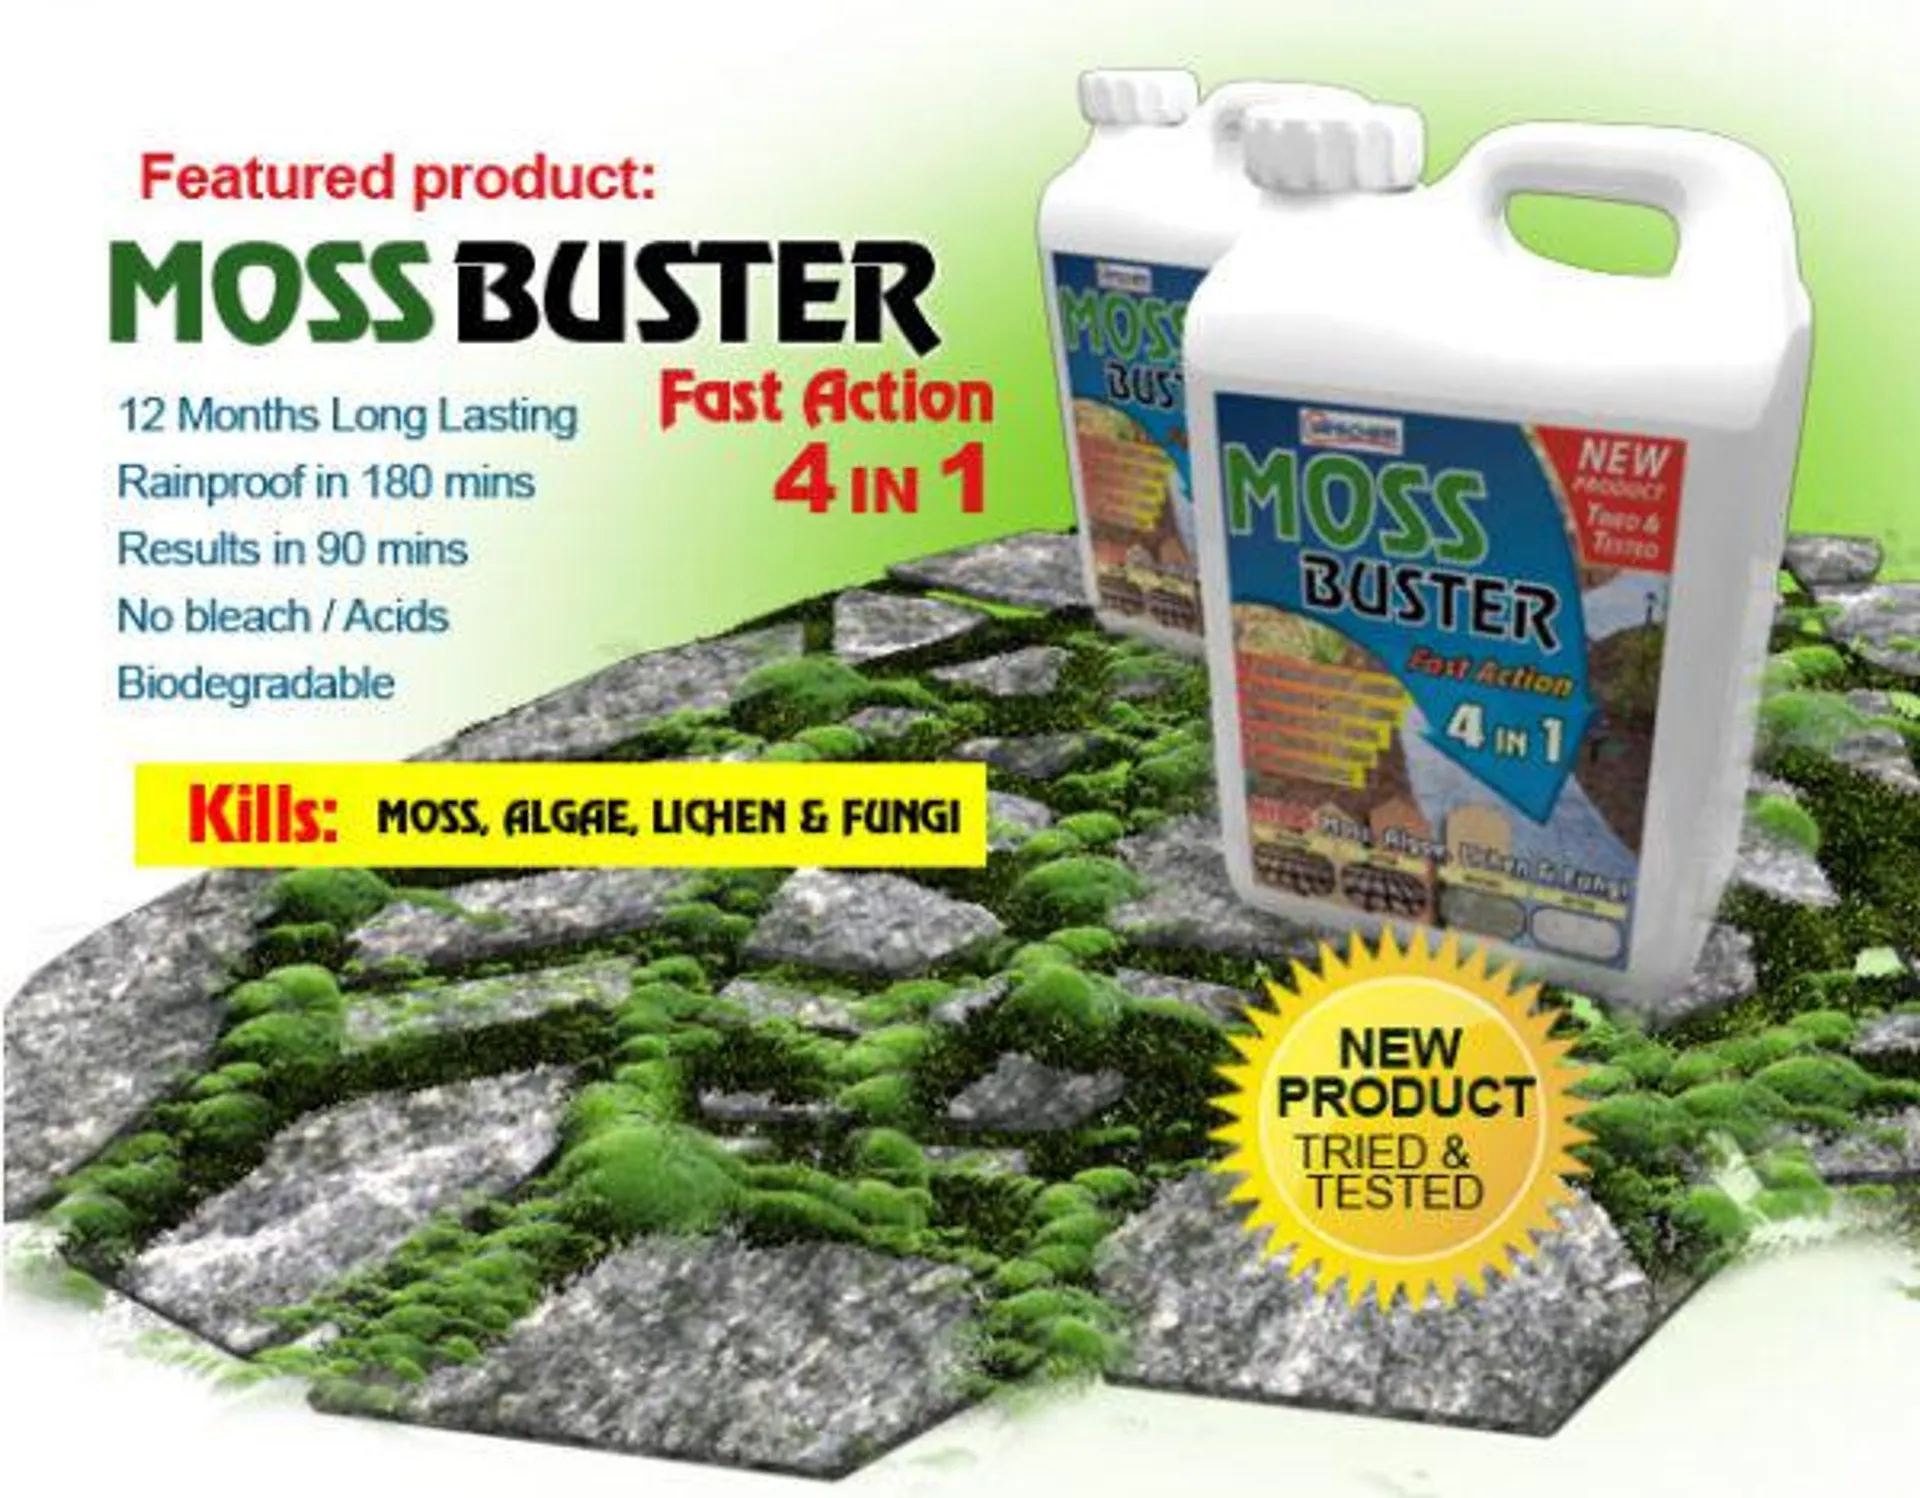 Wes Chem Moss Buster 4 in 1 – replaced by Once